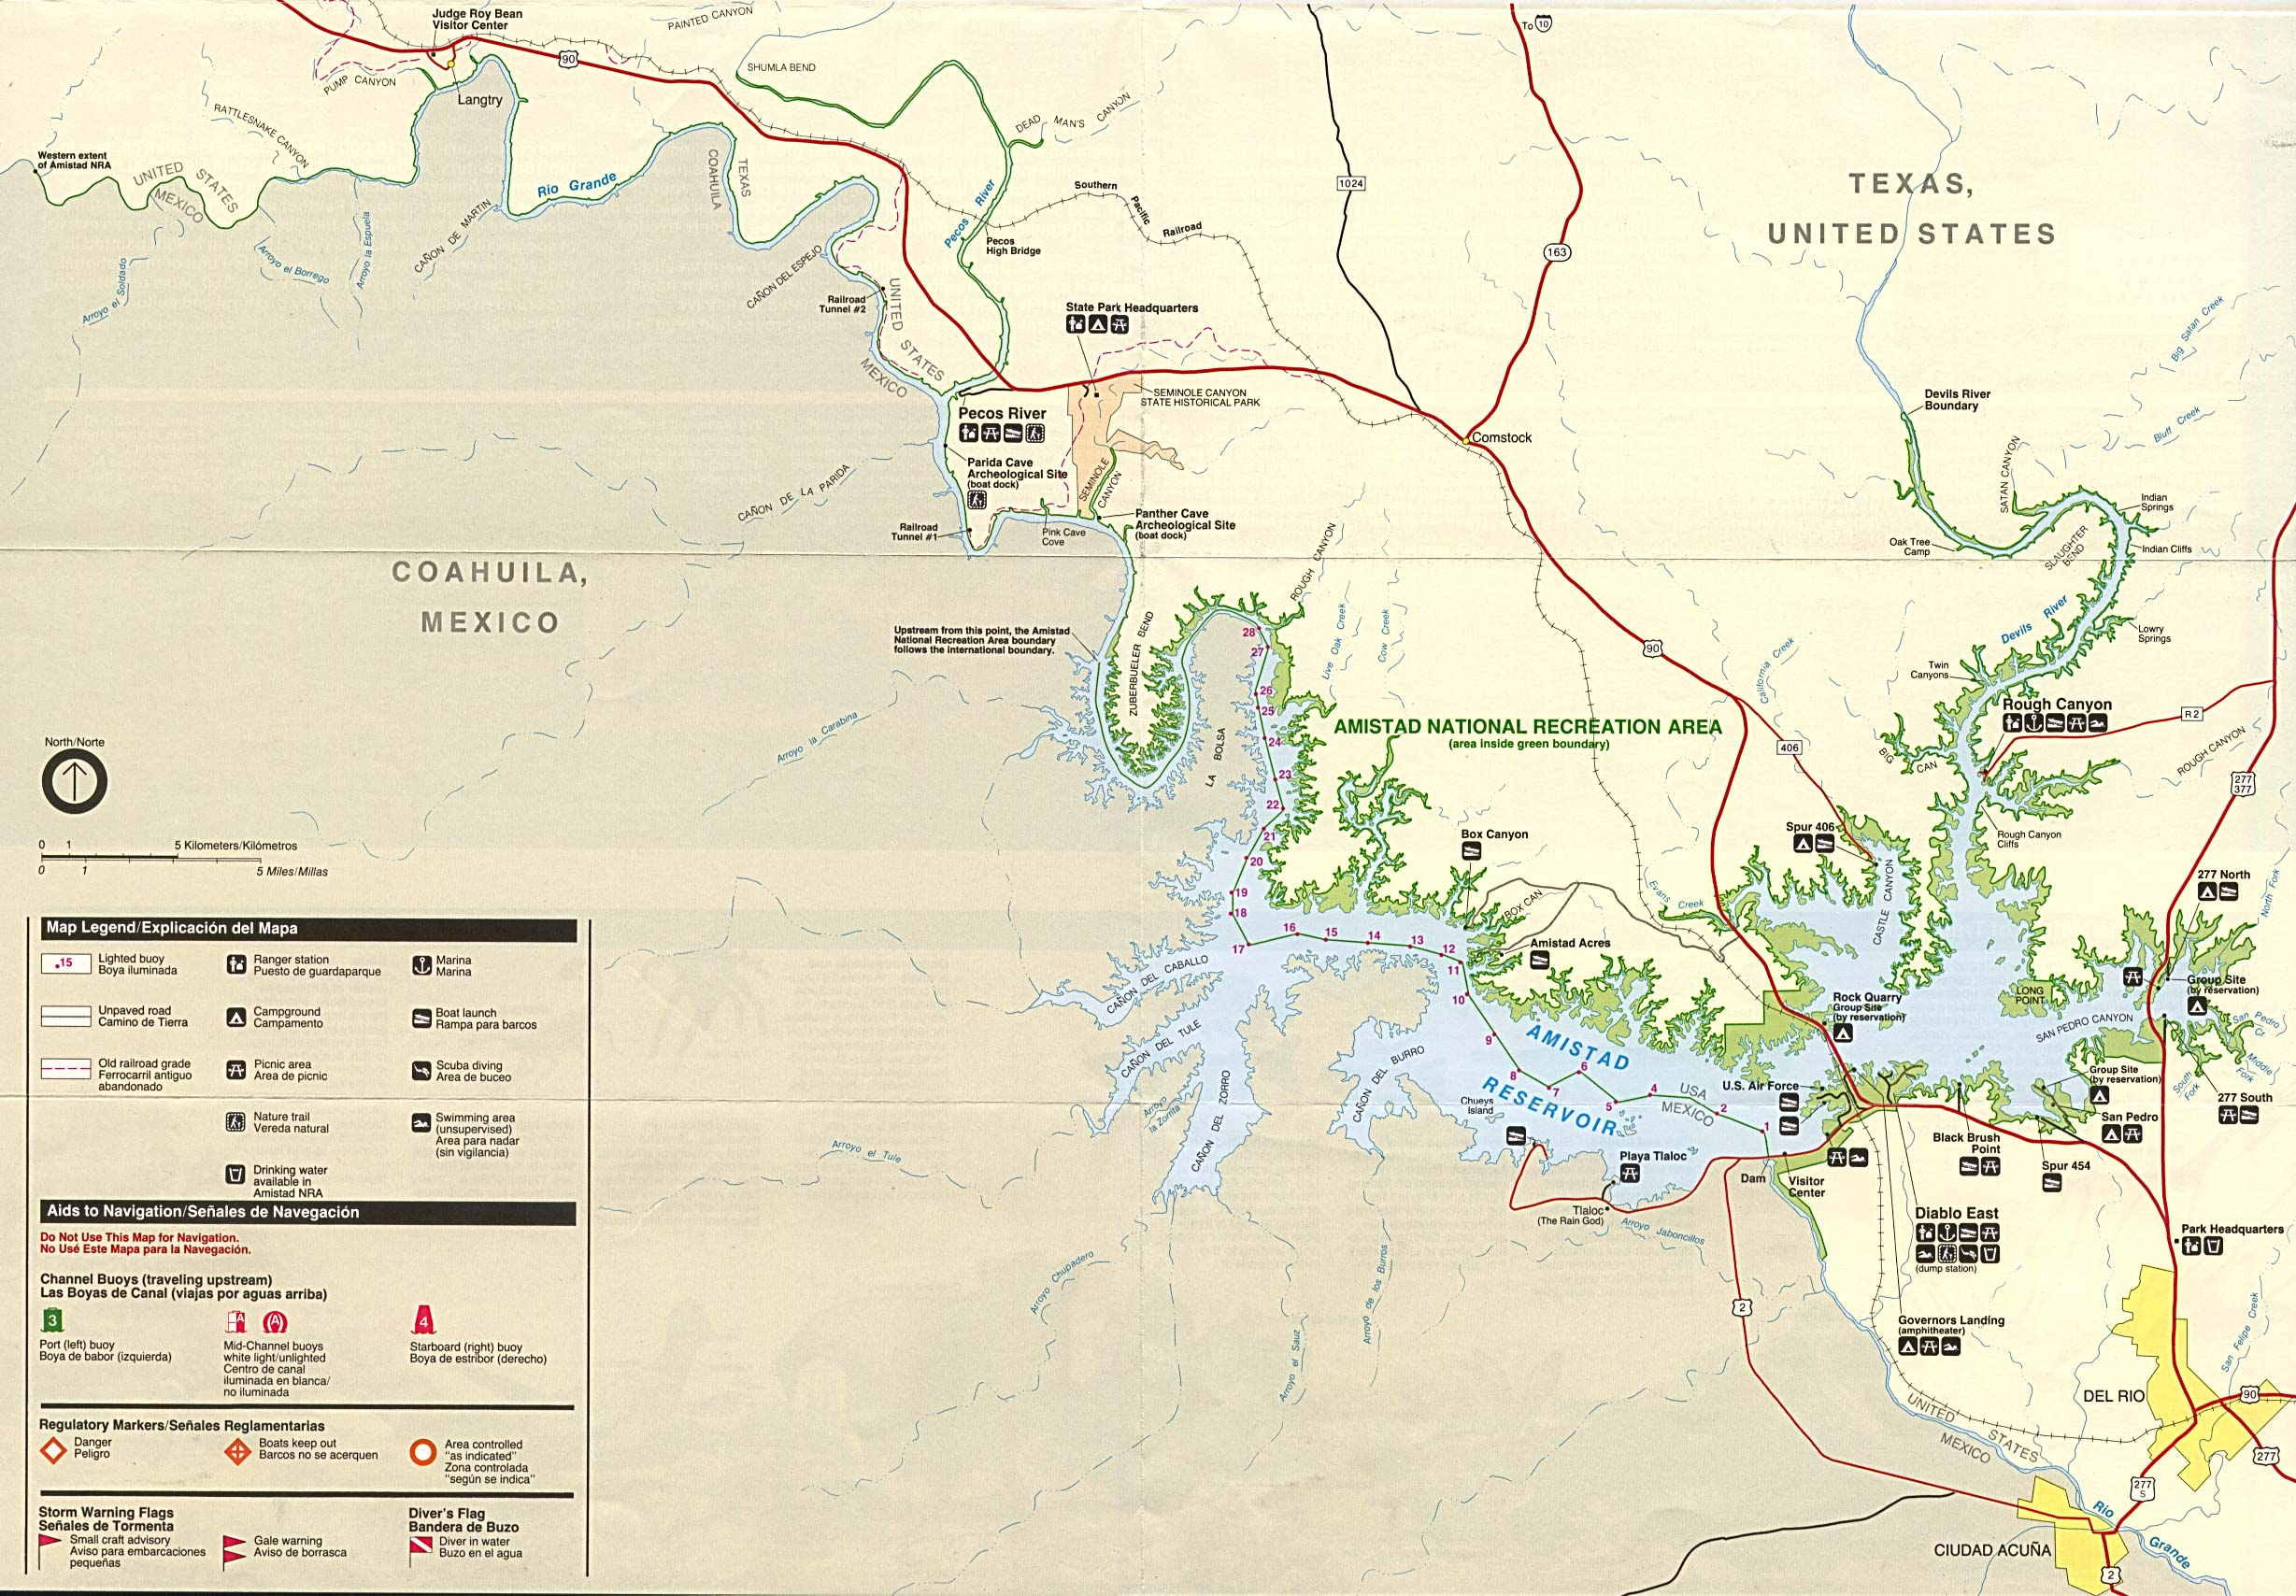 Texas State And National Park Maps - Perry-Castañeda Map Collection - National Parks In Texas Map